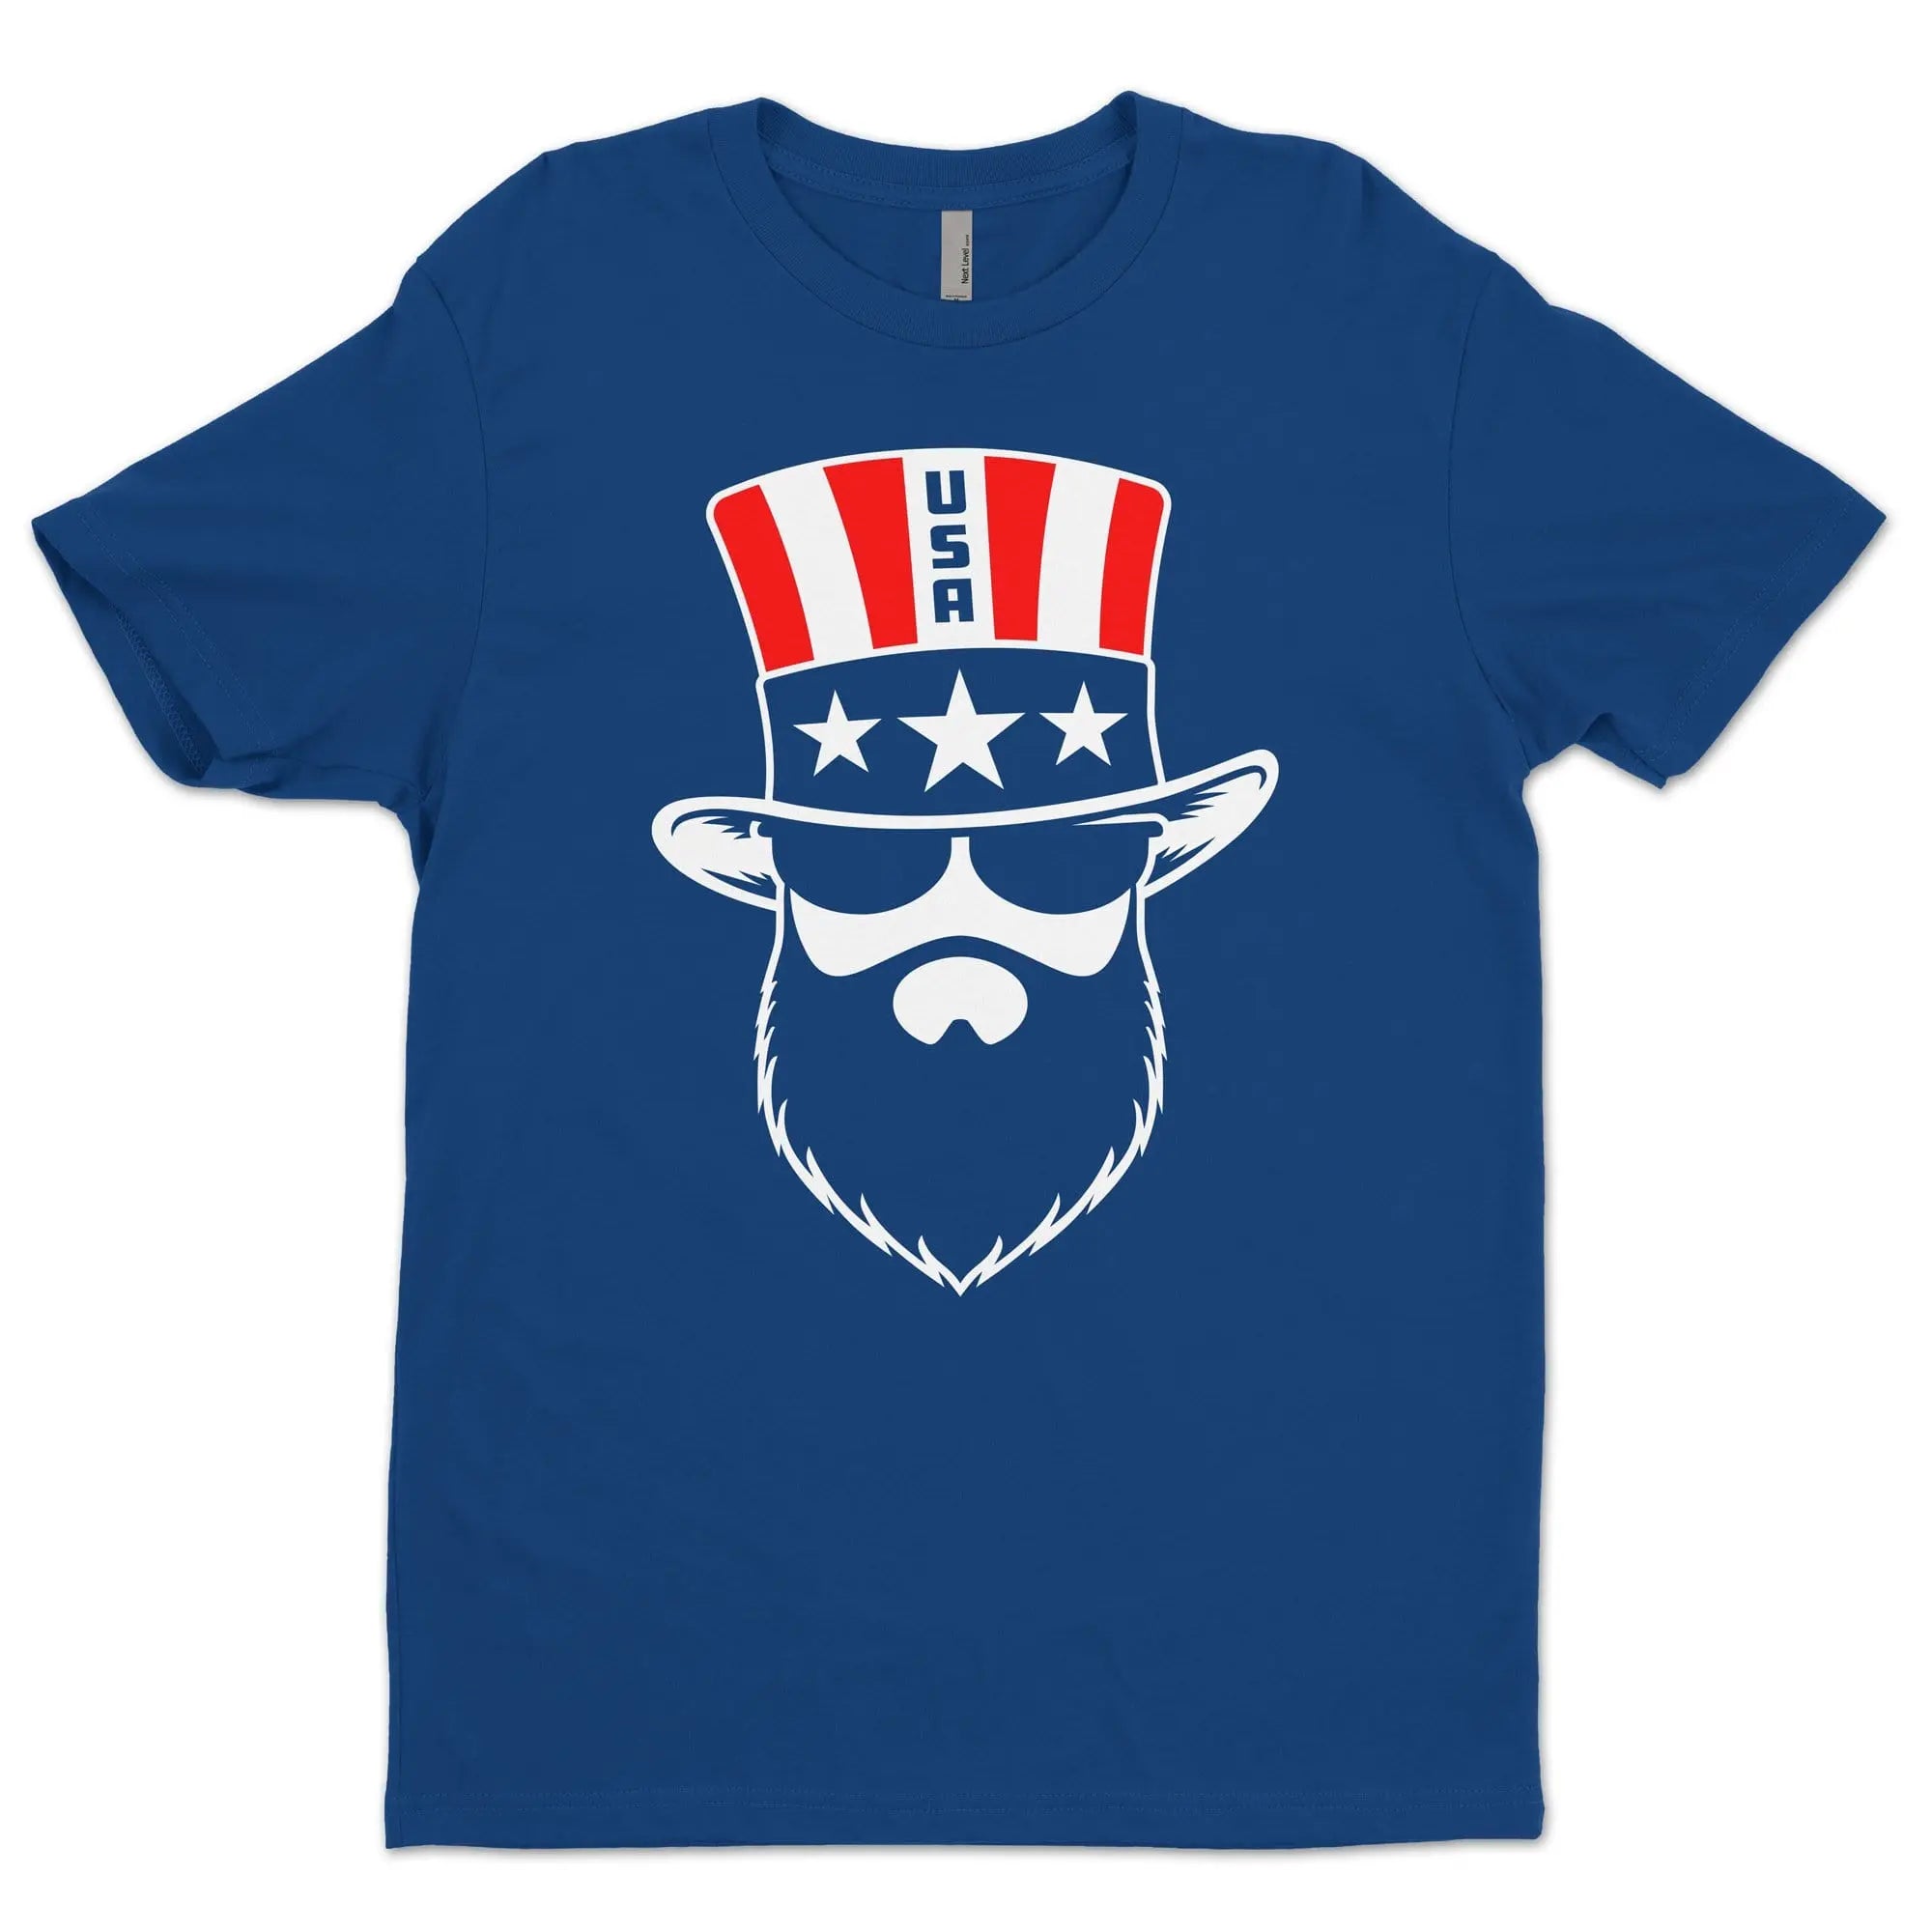 Bearded Patriot No Shave Life T-Shirt - Limited Edition|T-Shirt